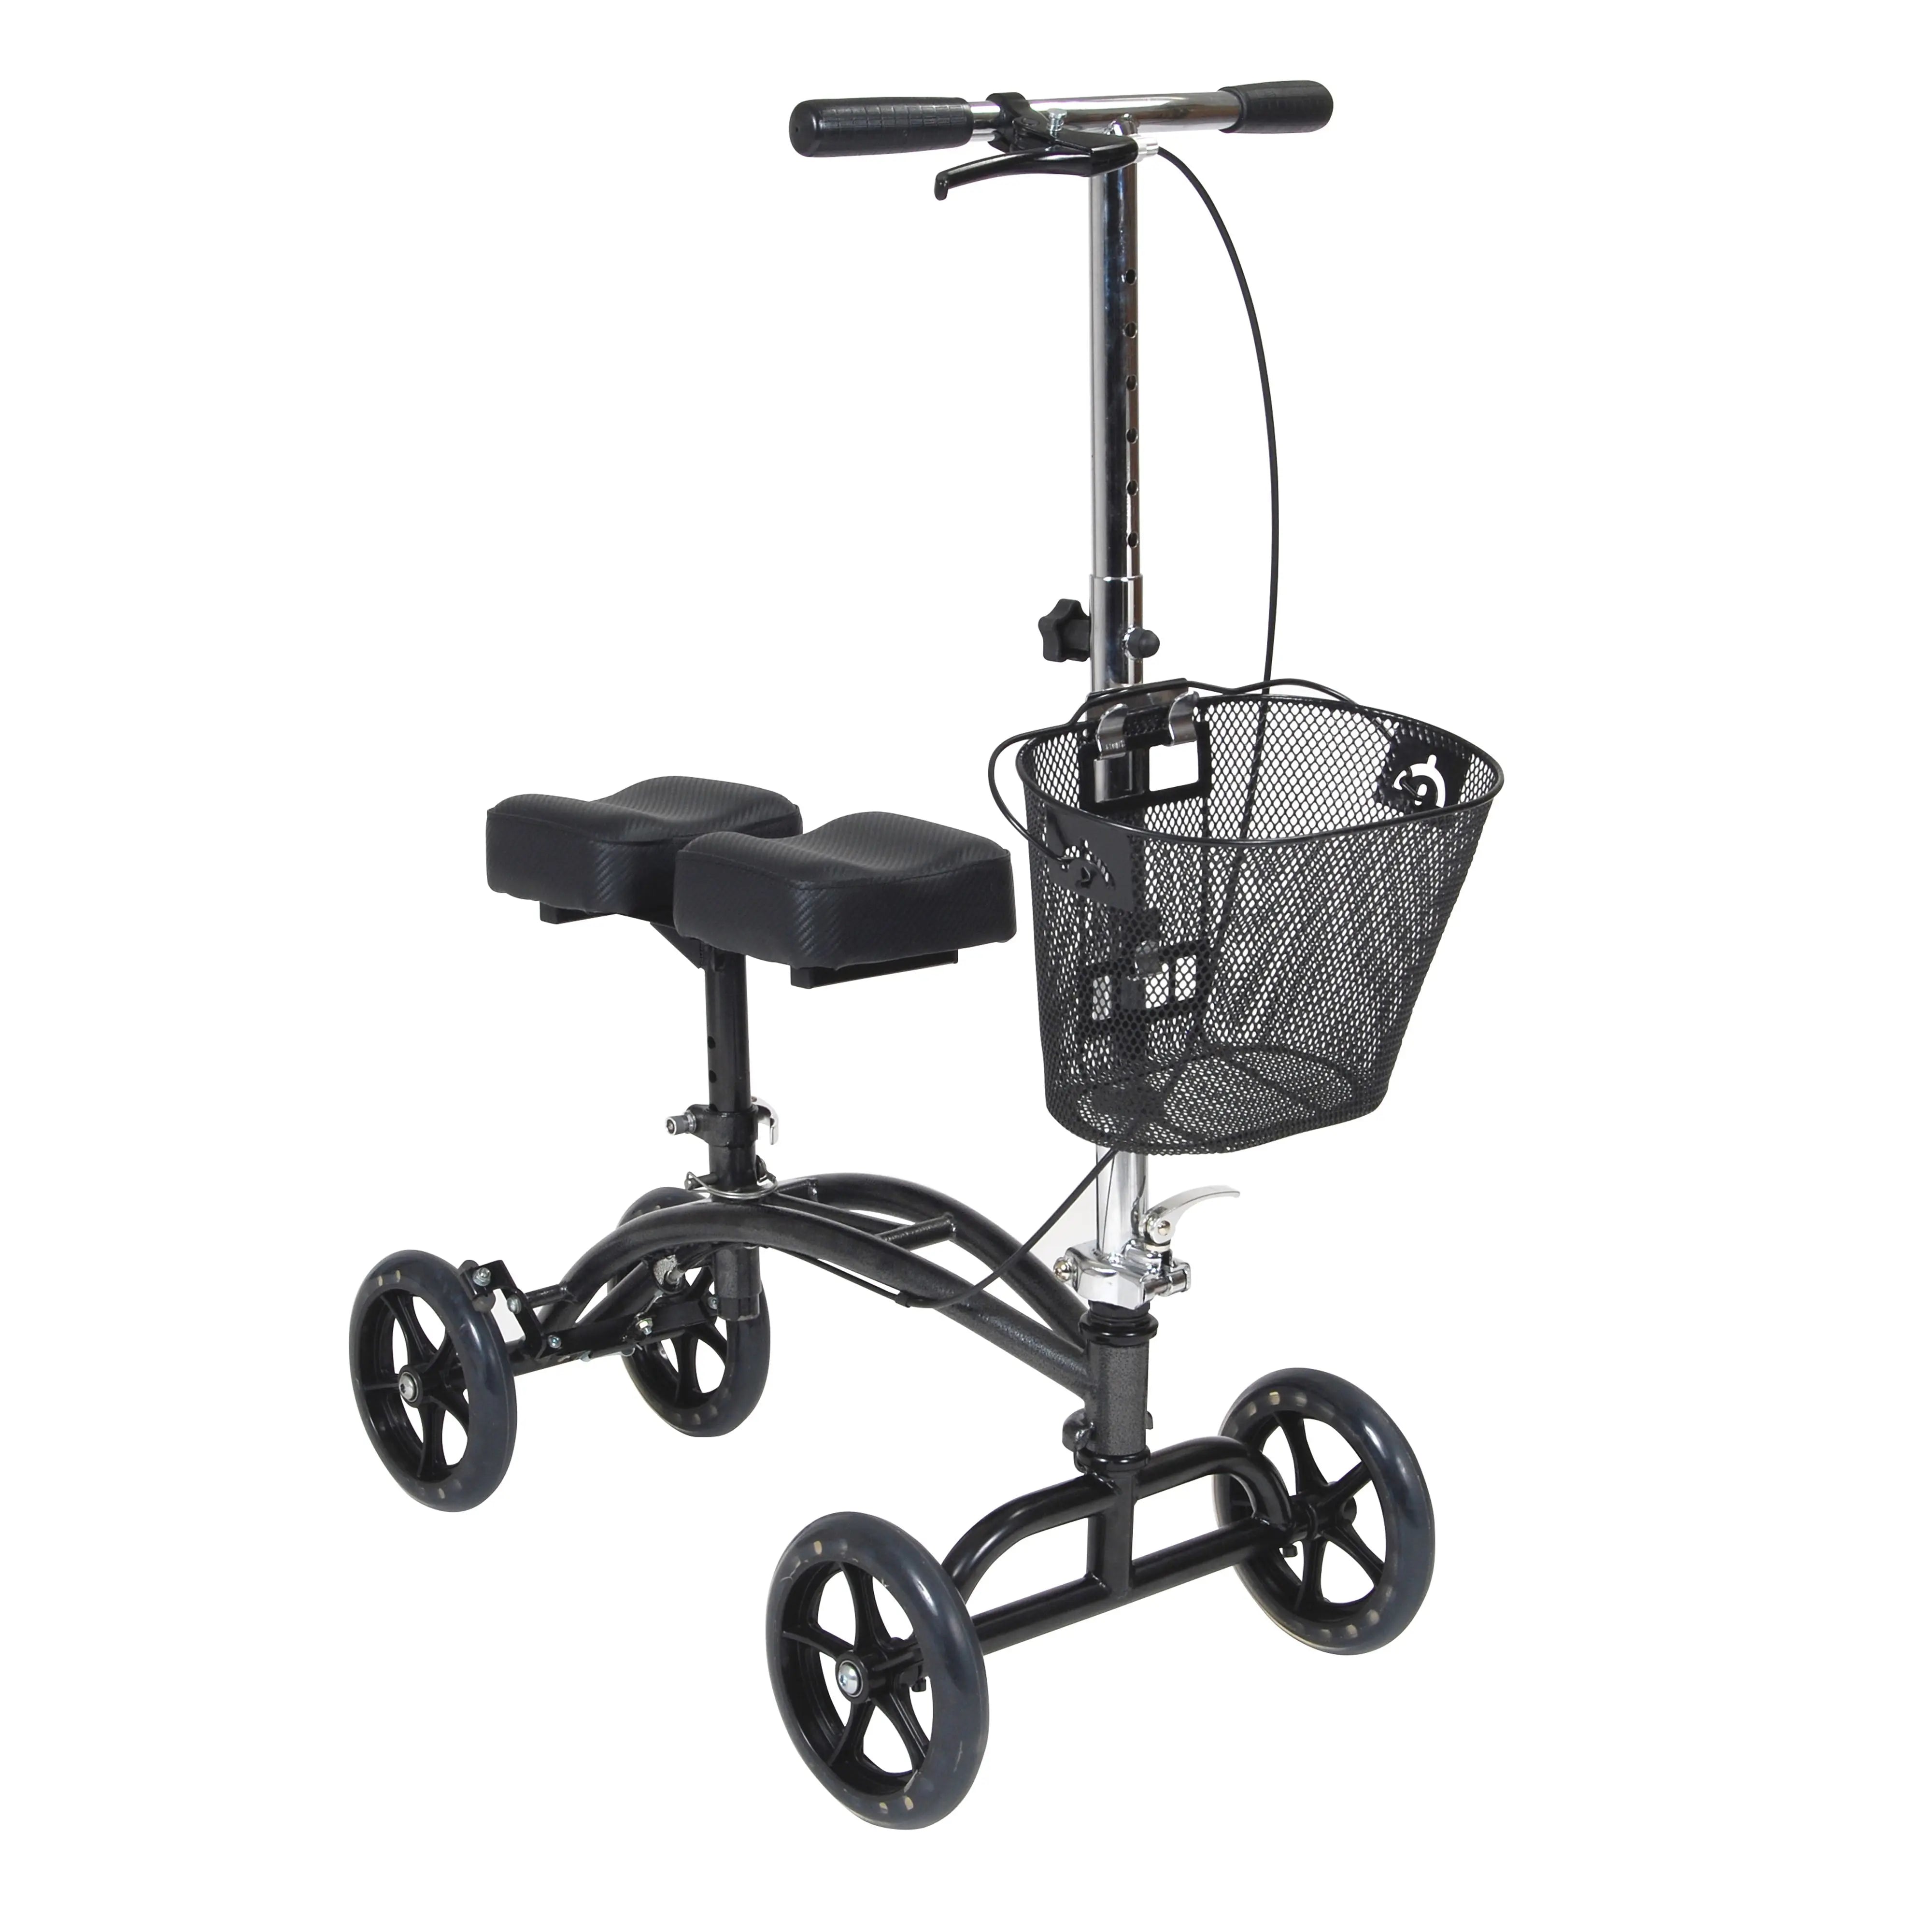 Dual Pad Steerable Knee Walker Knee Scooter with Basket, Alternative to Crutches - Home Health Store Inc